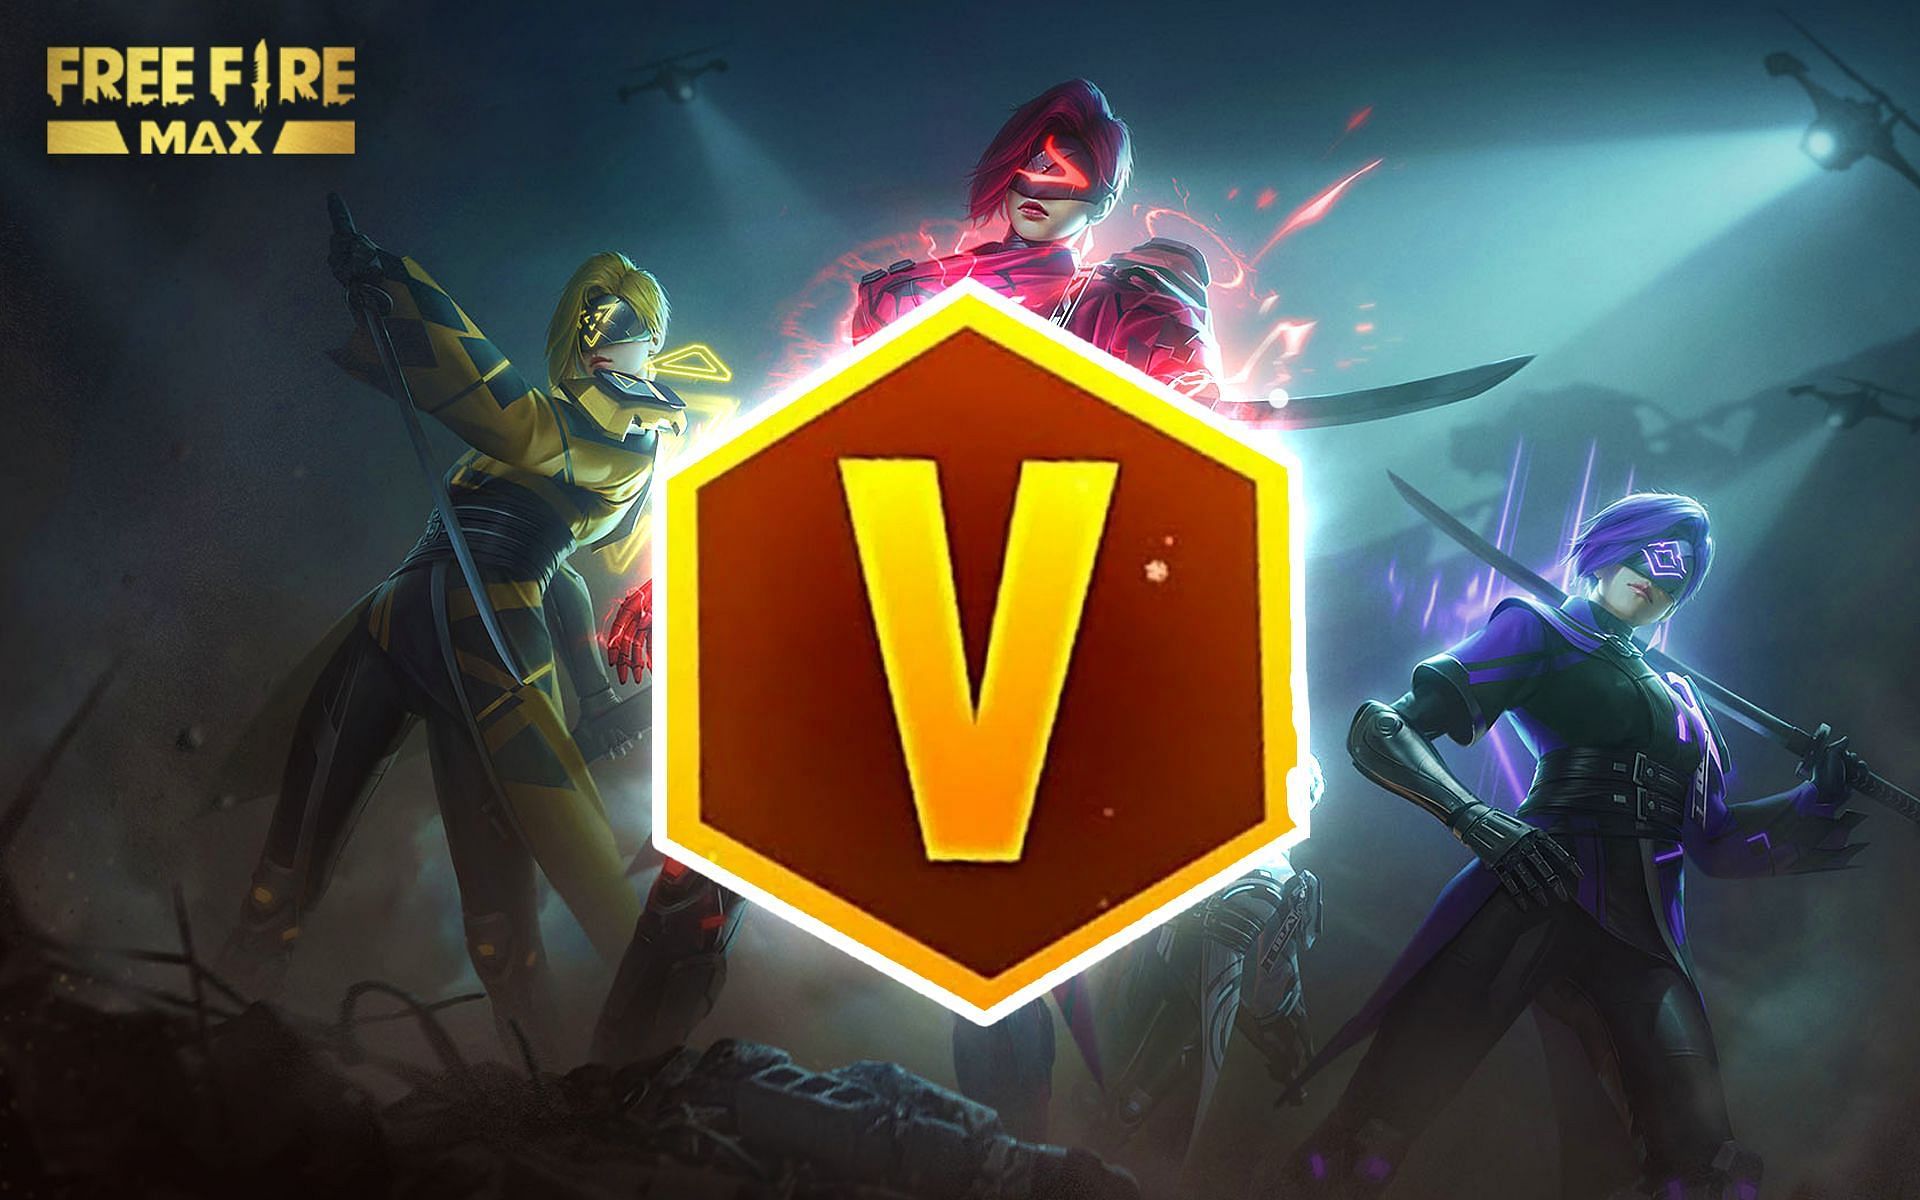 V Badge has caught the attention of players in the Free Fire MAX community (Image via Sportskeeda)